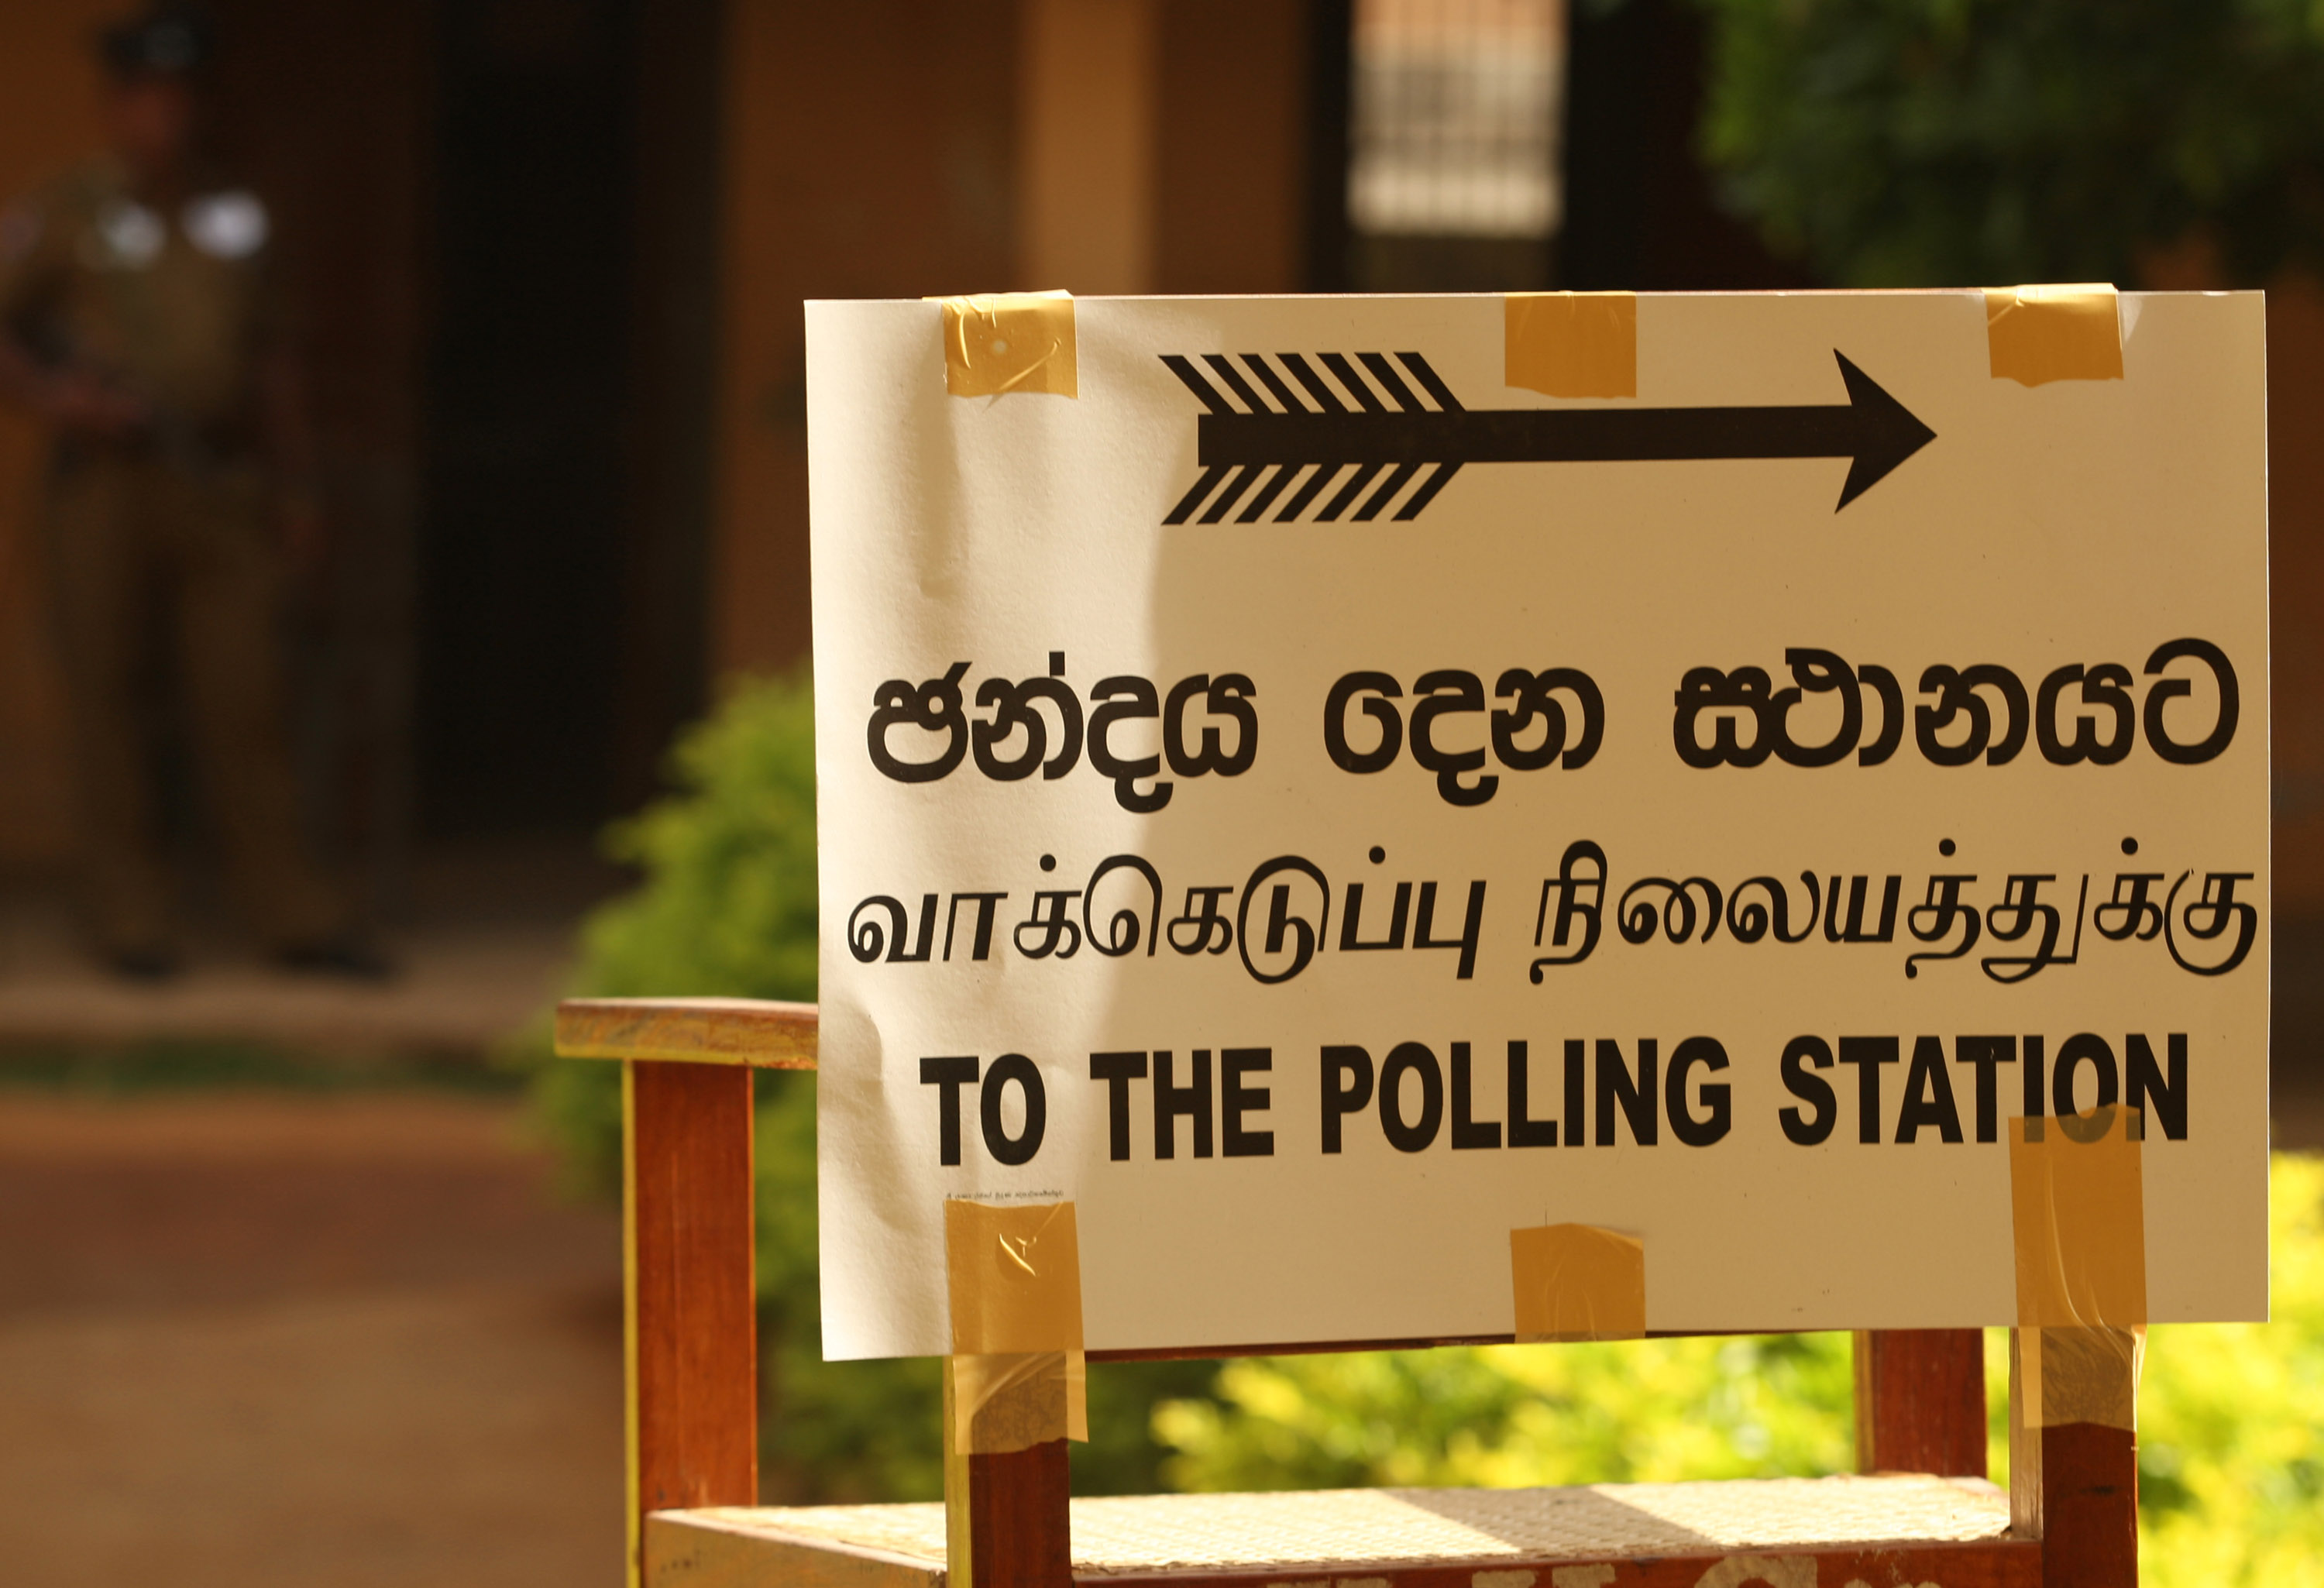 Nearly 60,000 postal voting applications accepted: Elections Commission